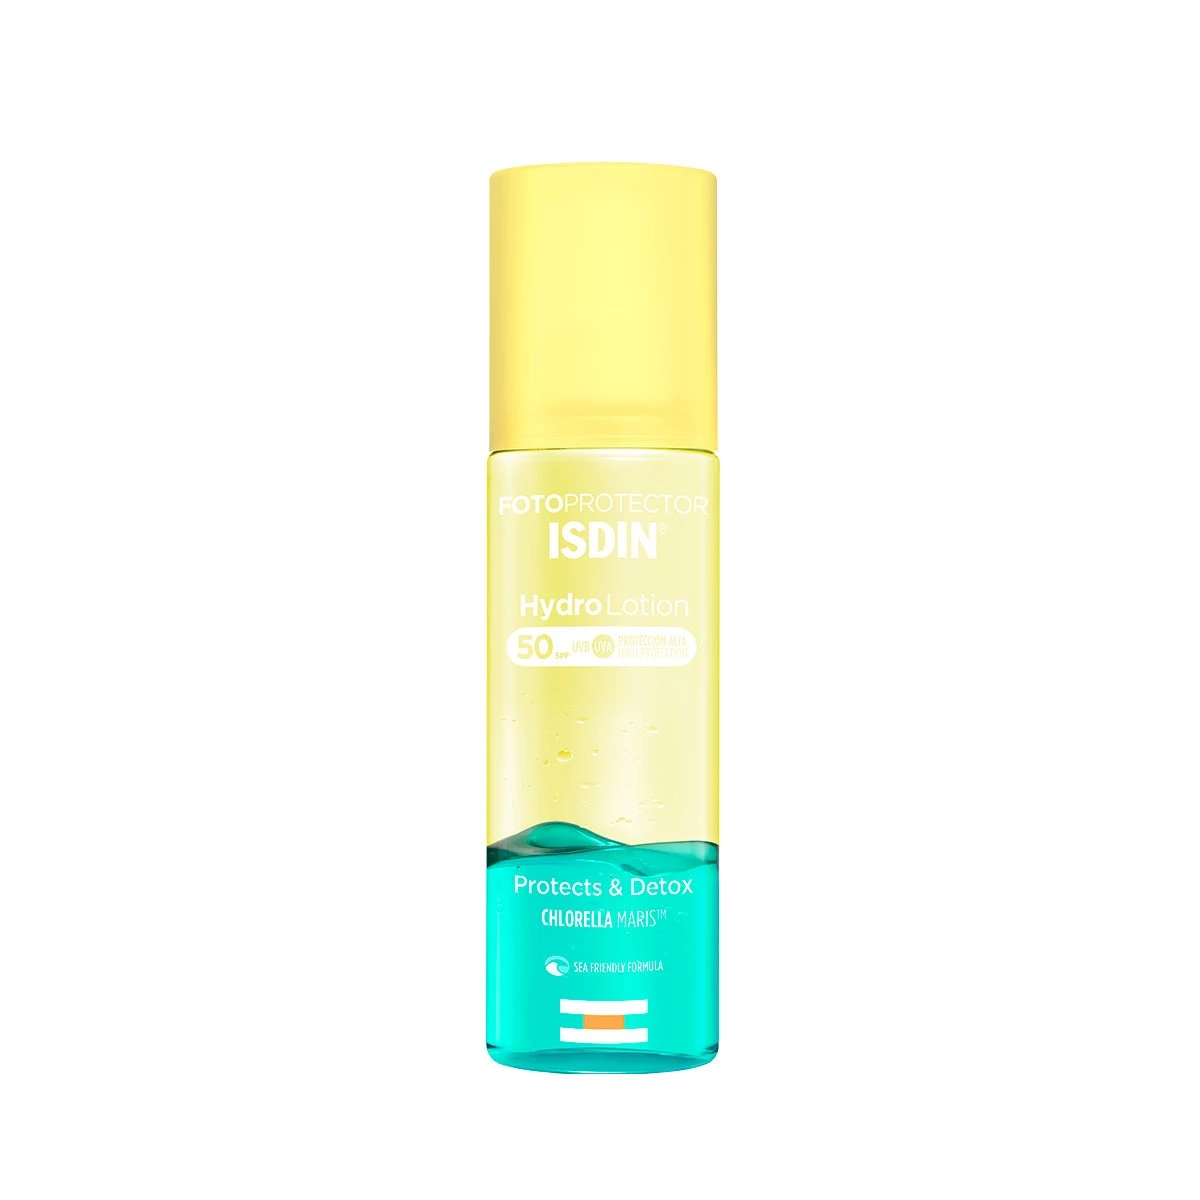 Isdin Fotoprotector Hydro Lotion SPF50 Protect & Detox, 200ml.